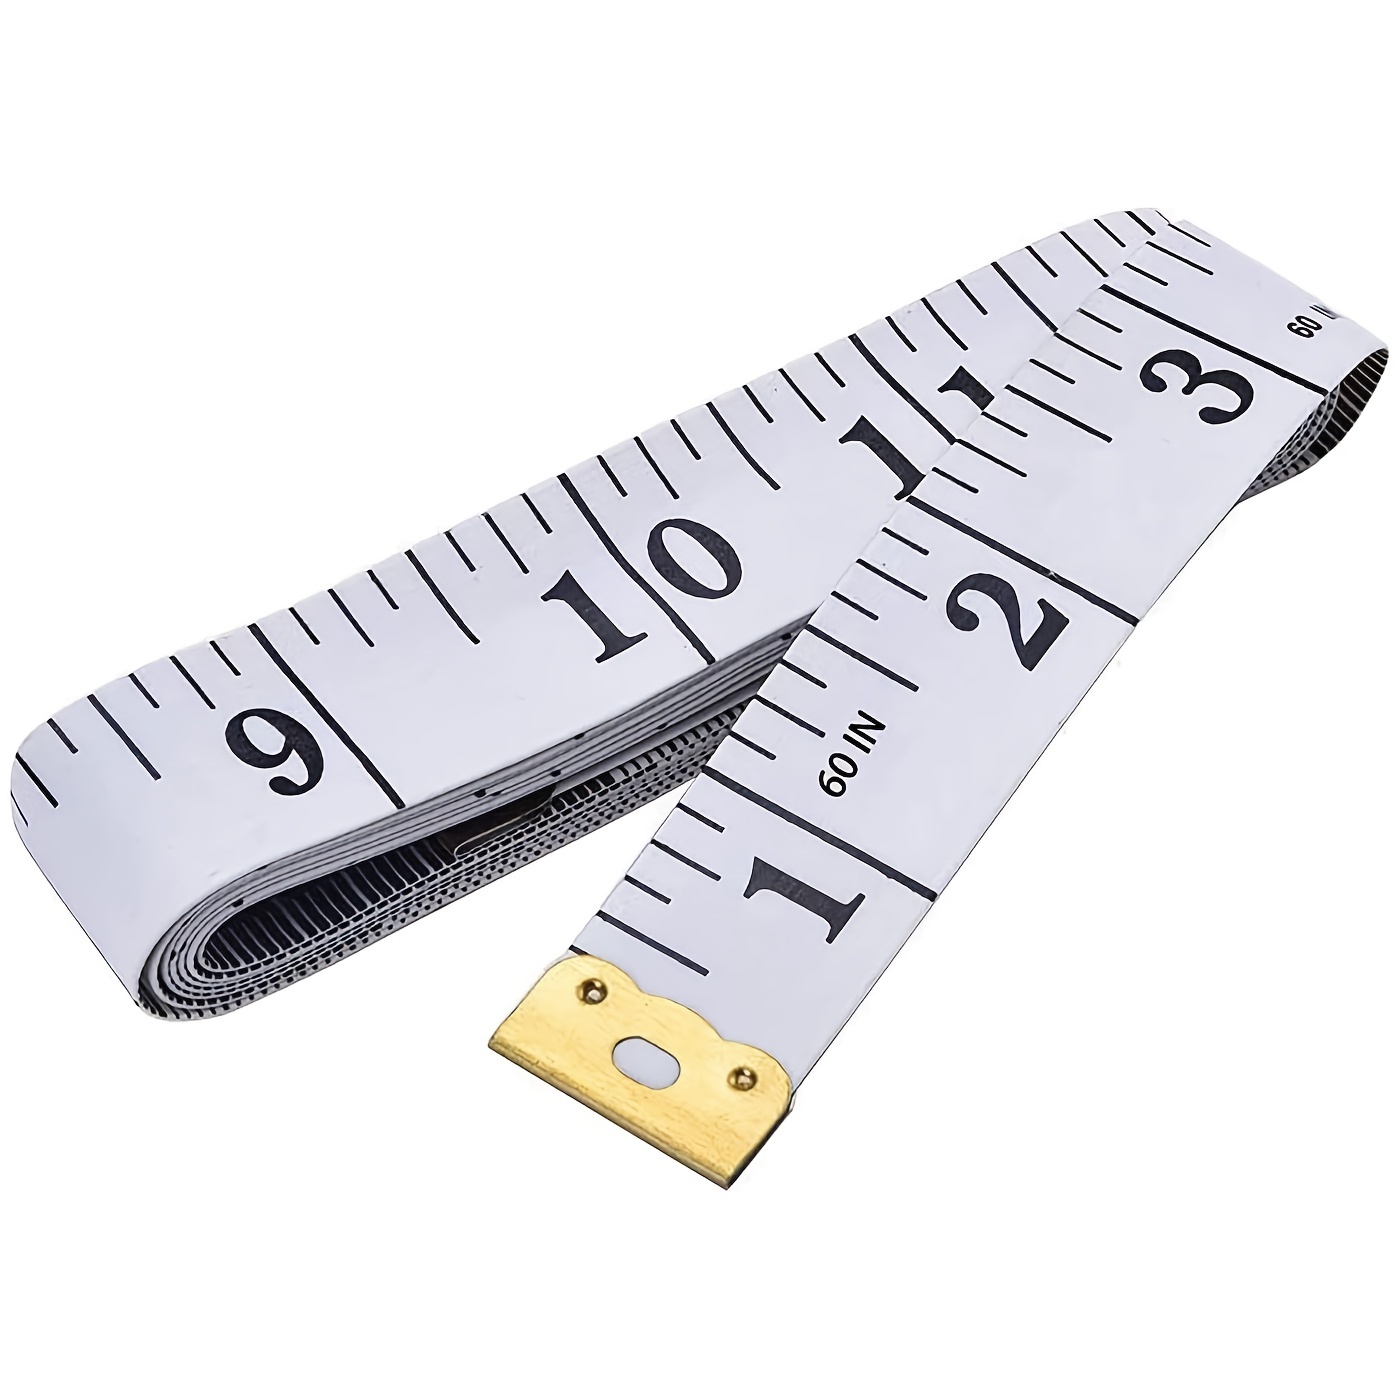 Body Tape Measure, For Measurement, Size: 0 To 150cm/0 To 60